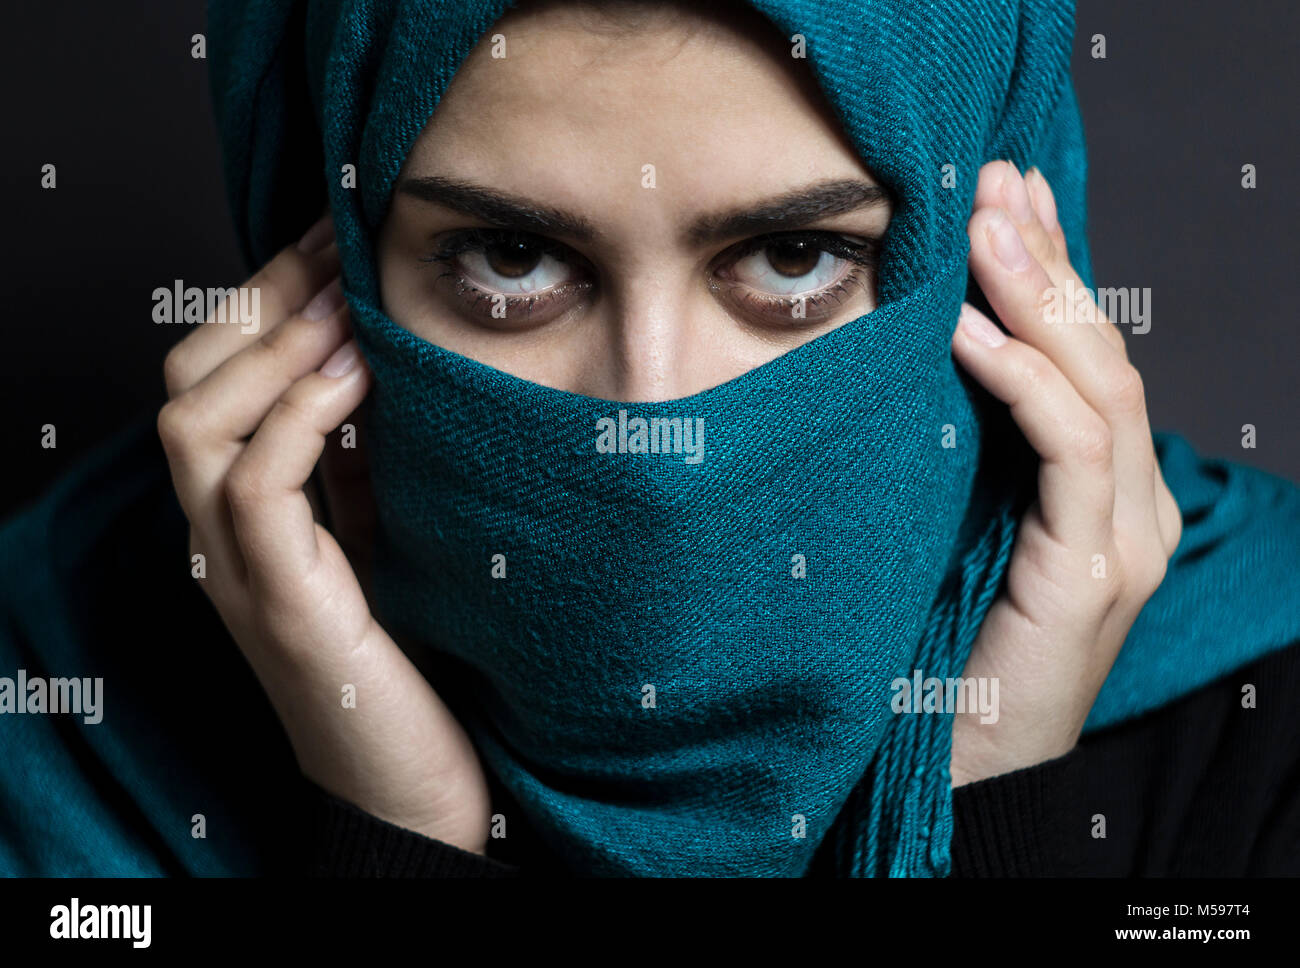 A Muslim Girl With Beautiful Eyes Is Covered With A Hijab Arab